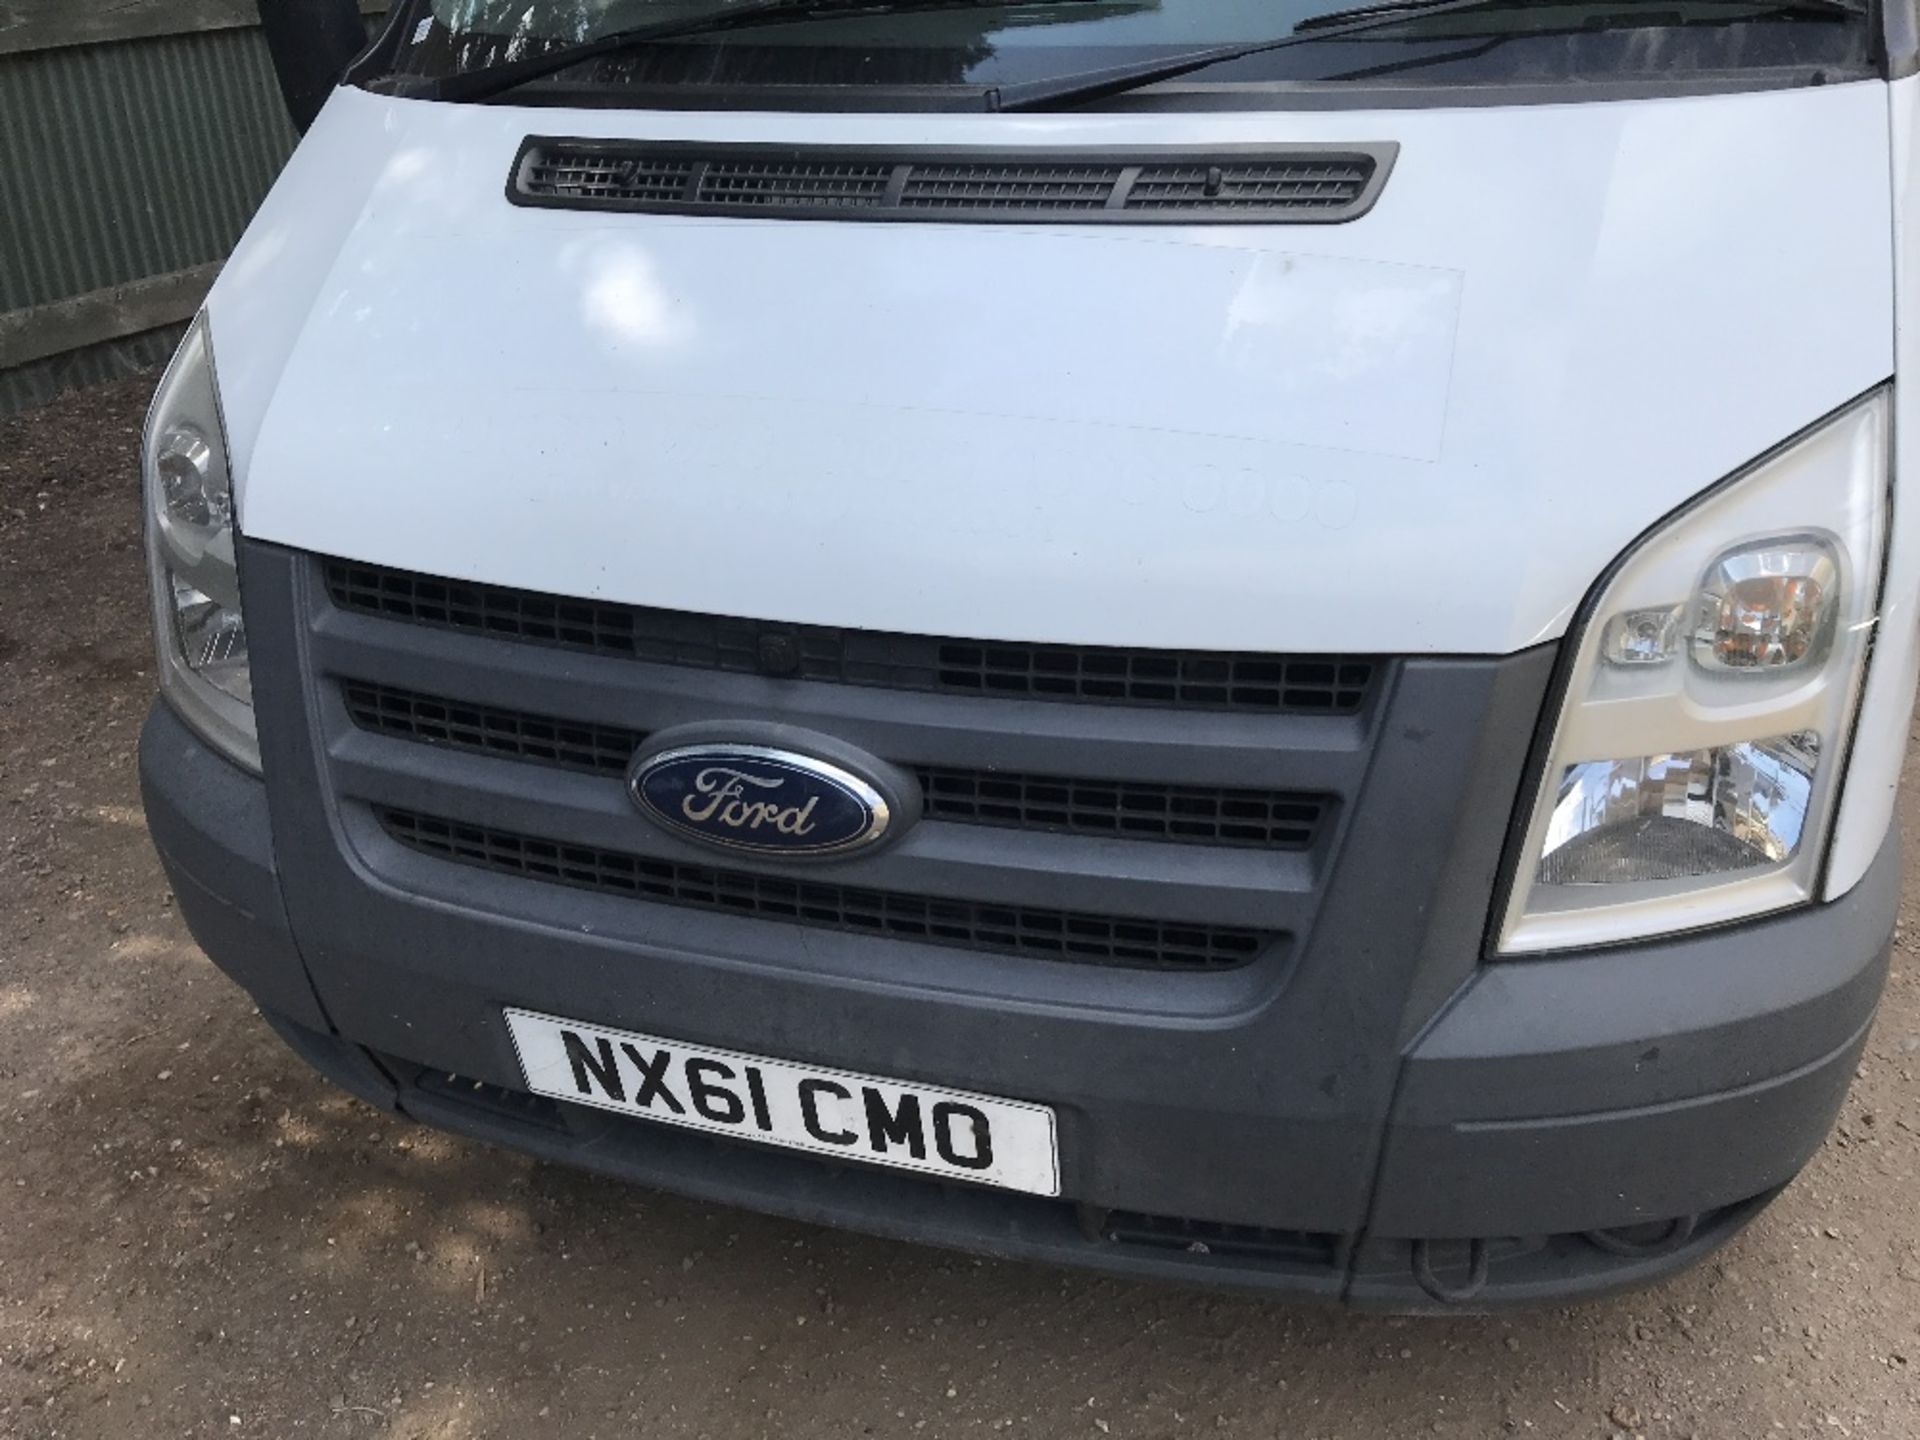 FORD TRANSIT LW8 HIGH TOP PANEL VAN, REGISTRATION: NX61 CMO. 158863 RECORDED MILES. DIRECT FROM - Image 9 of 15